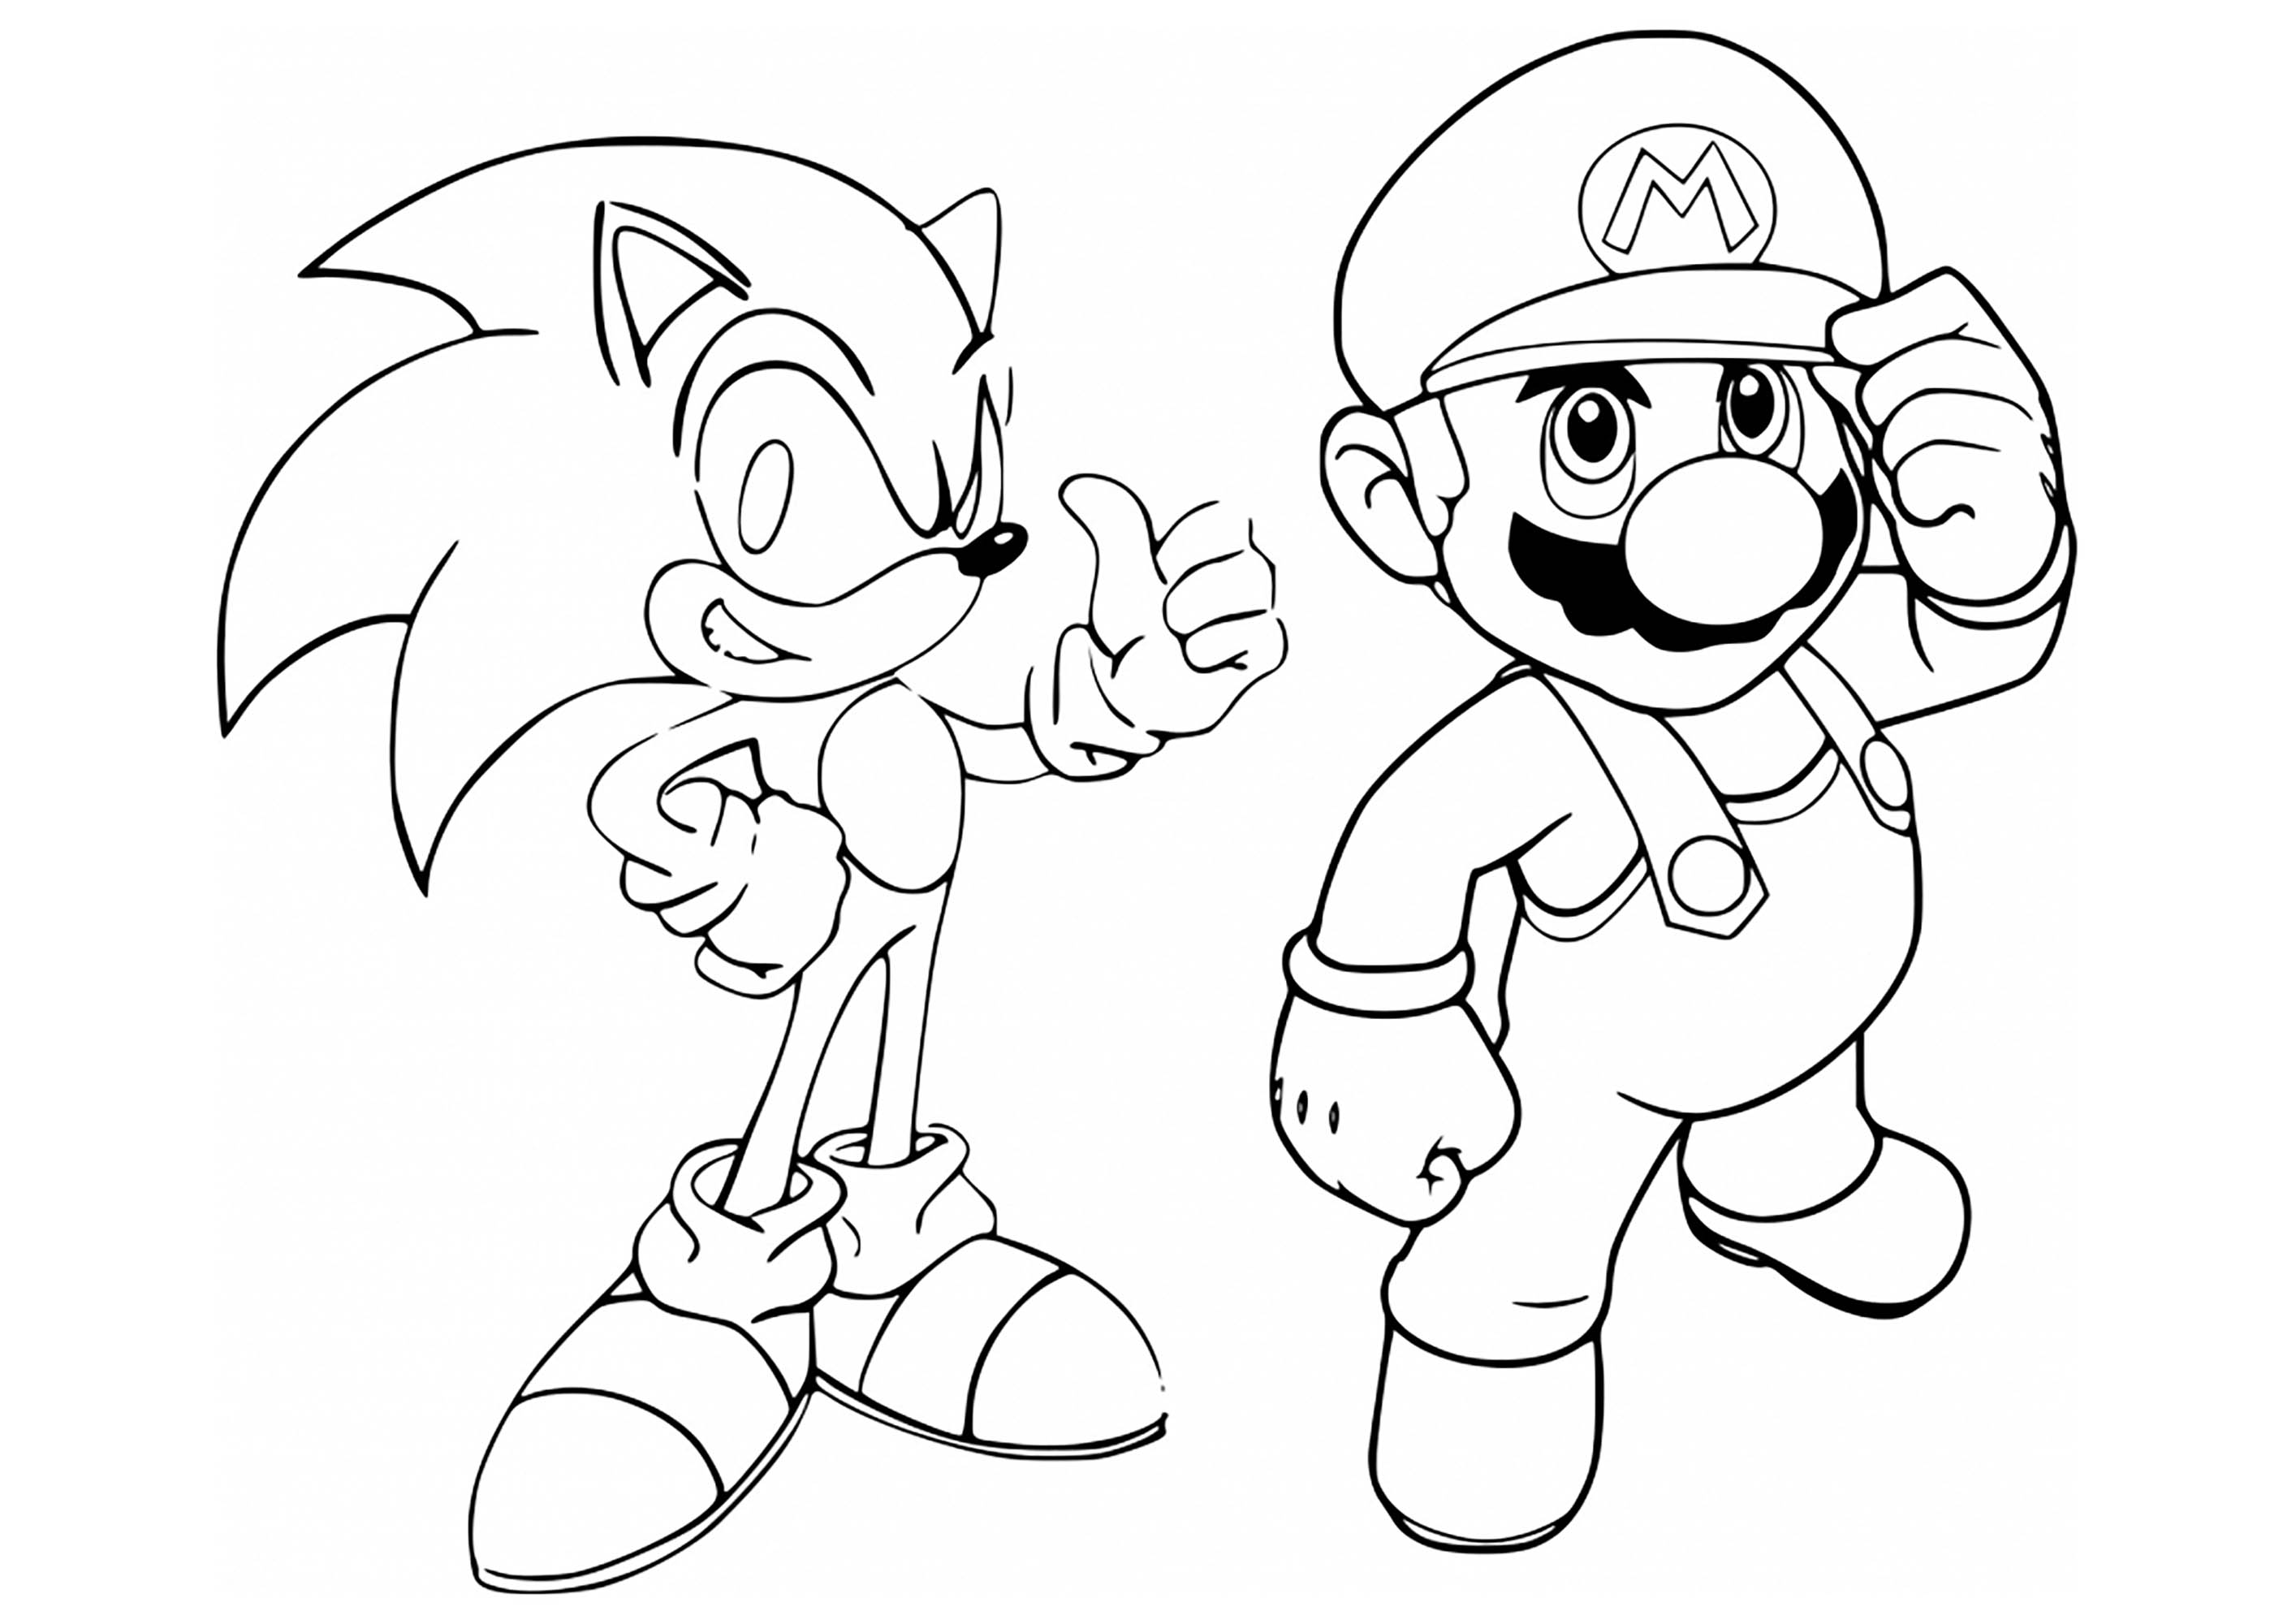 Sonic and Mario at the Olympic games Tokyo from Mario